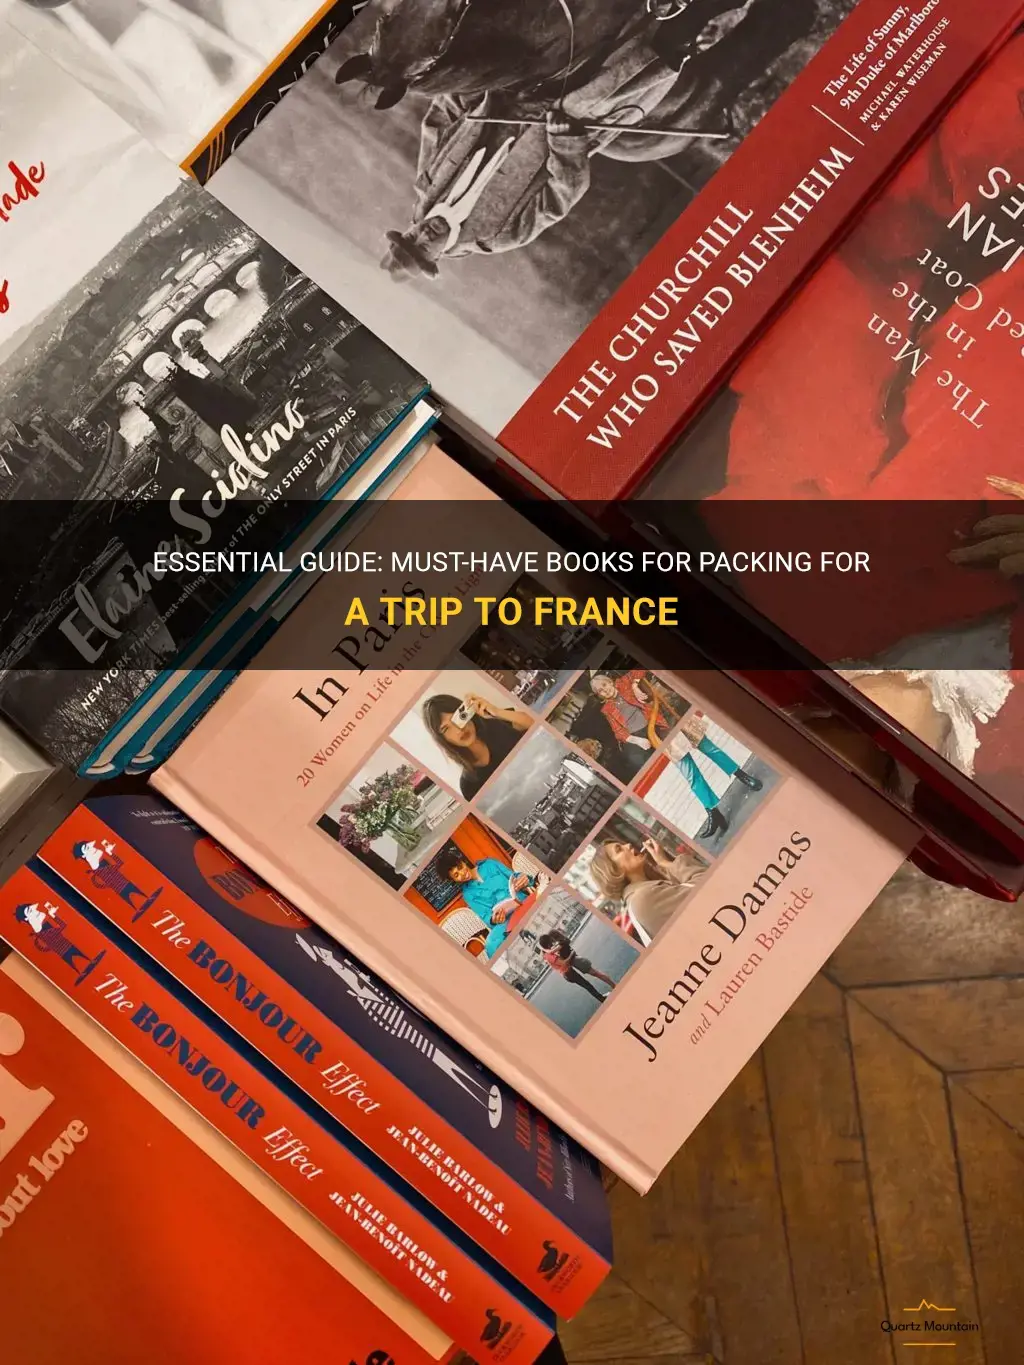 books about what to pack for a trip to france